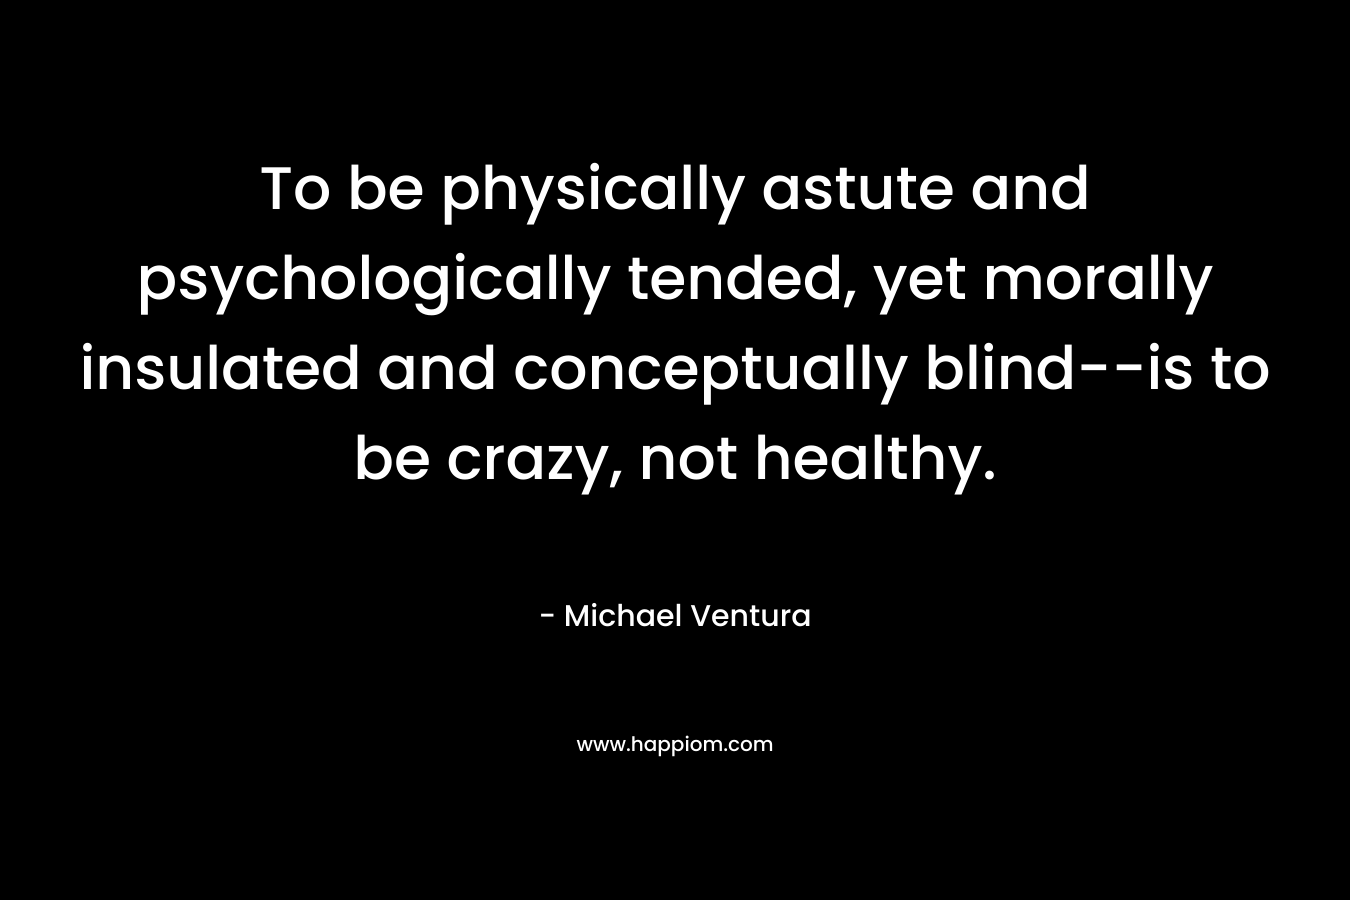 To be physically astute and psychologically tended, yet morally insulated and conceptually blind--is to be crazy, not healthy.